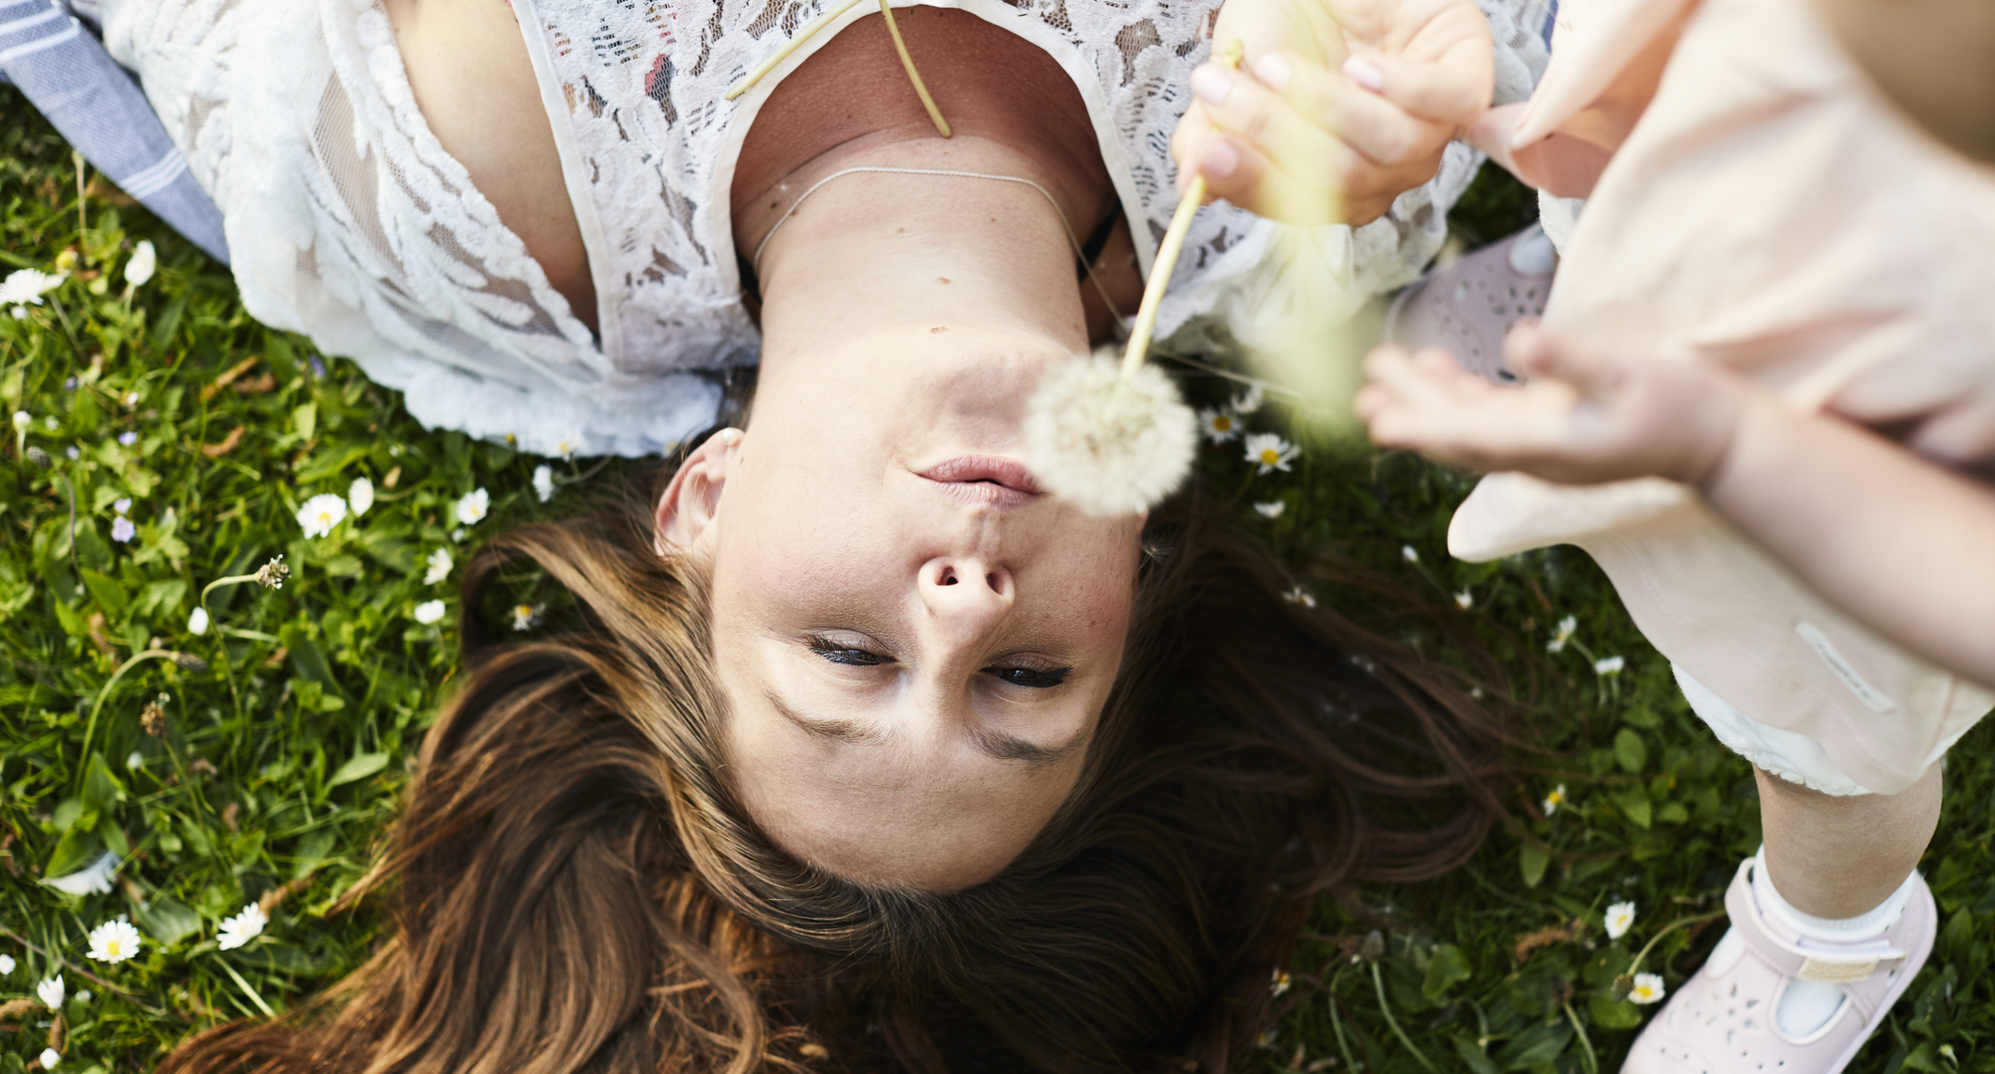 Allergy season is here and your eyes know it. Your America's Best optometrist can help you find relief. Woman in grass blowing a dandelion.